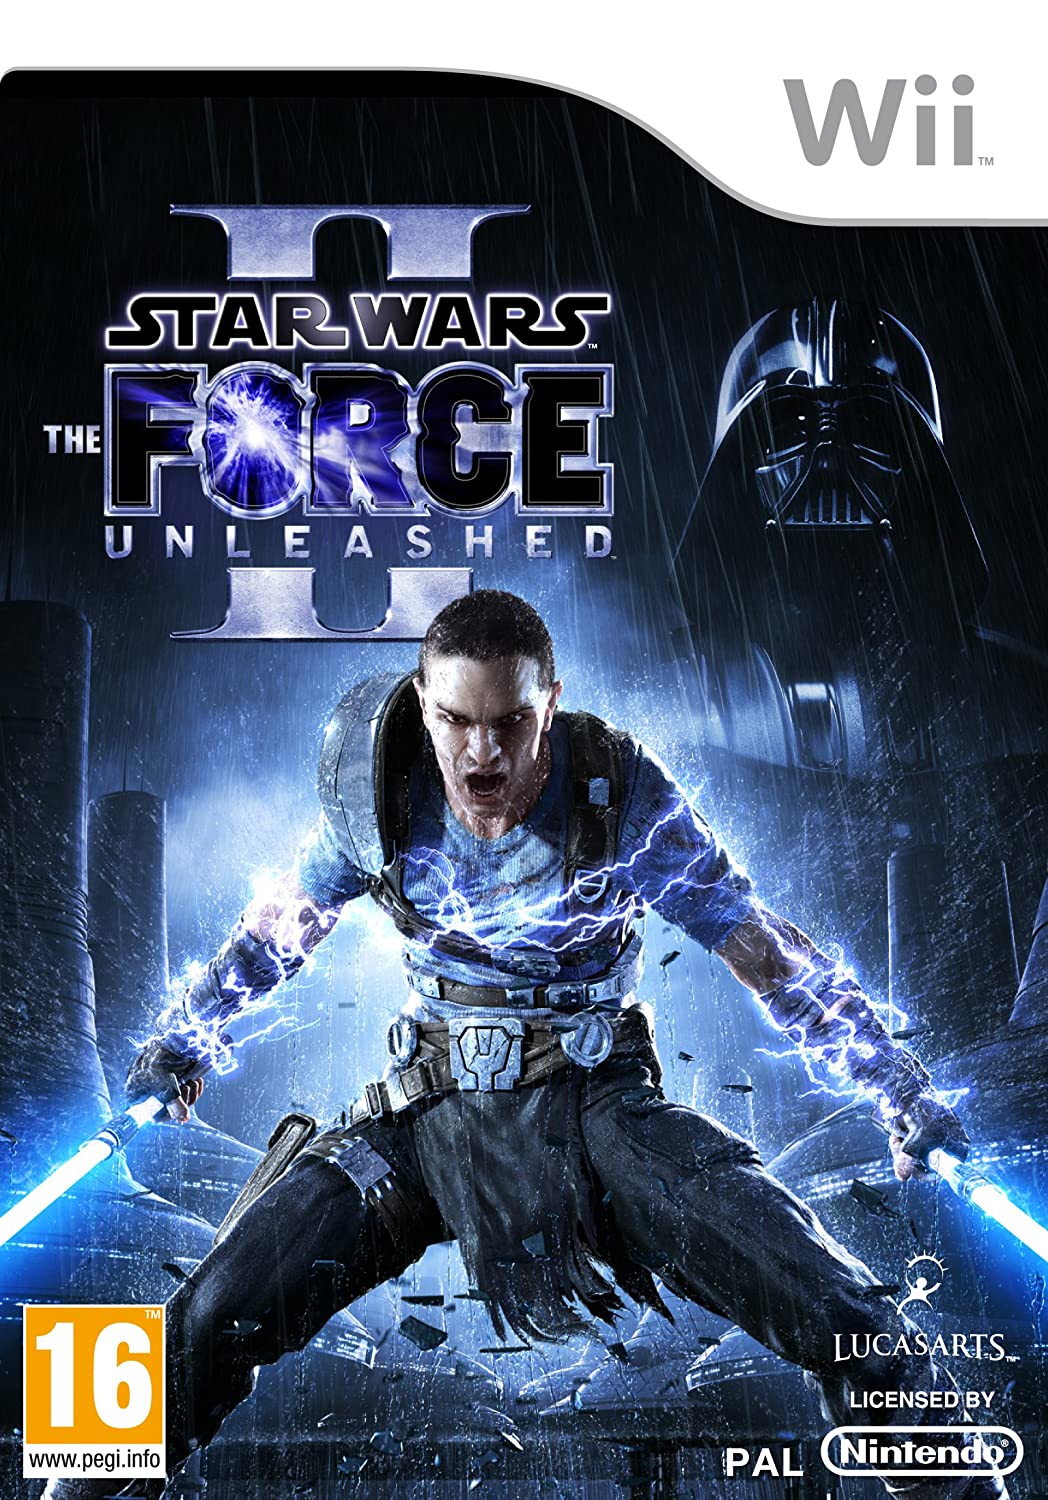 Star Wars: The Force Unleashed II player count stats